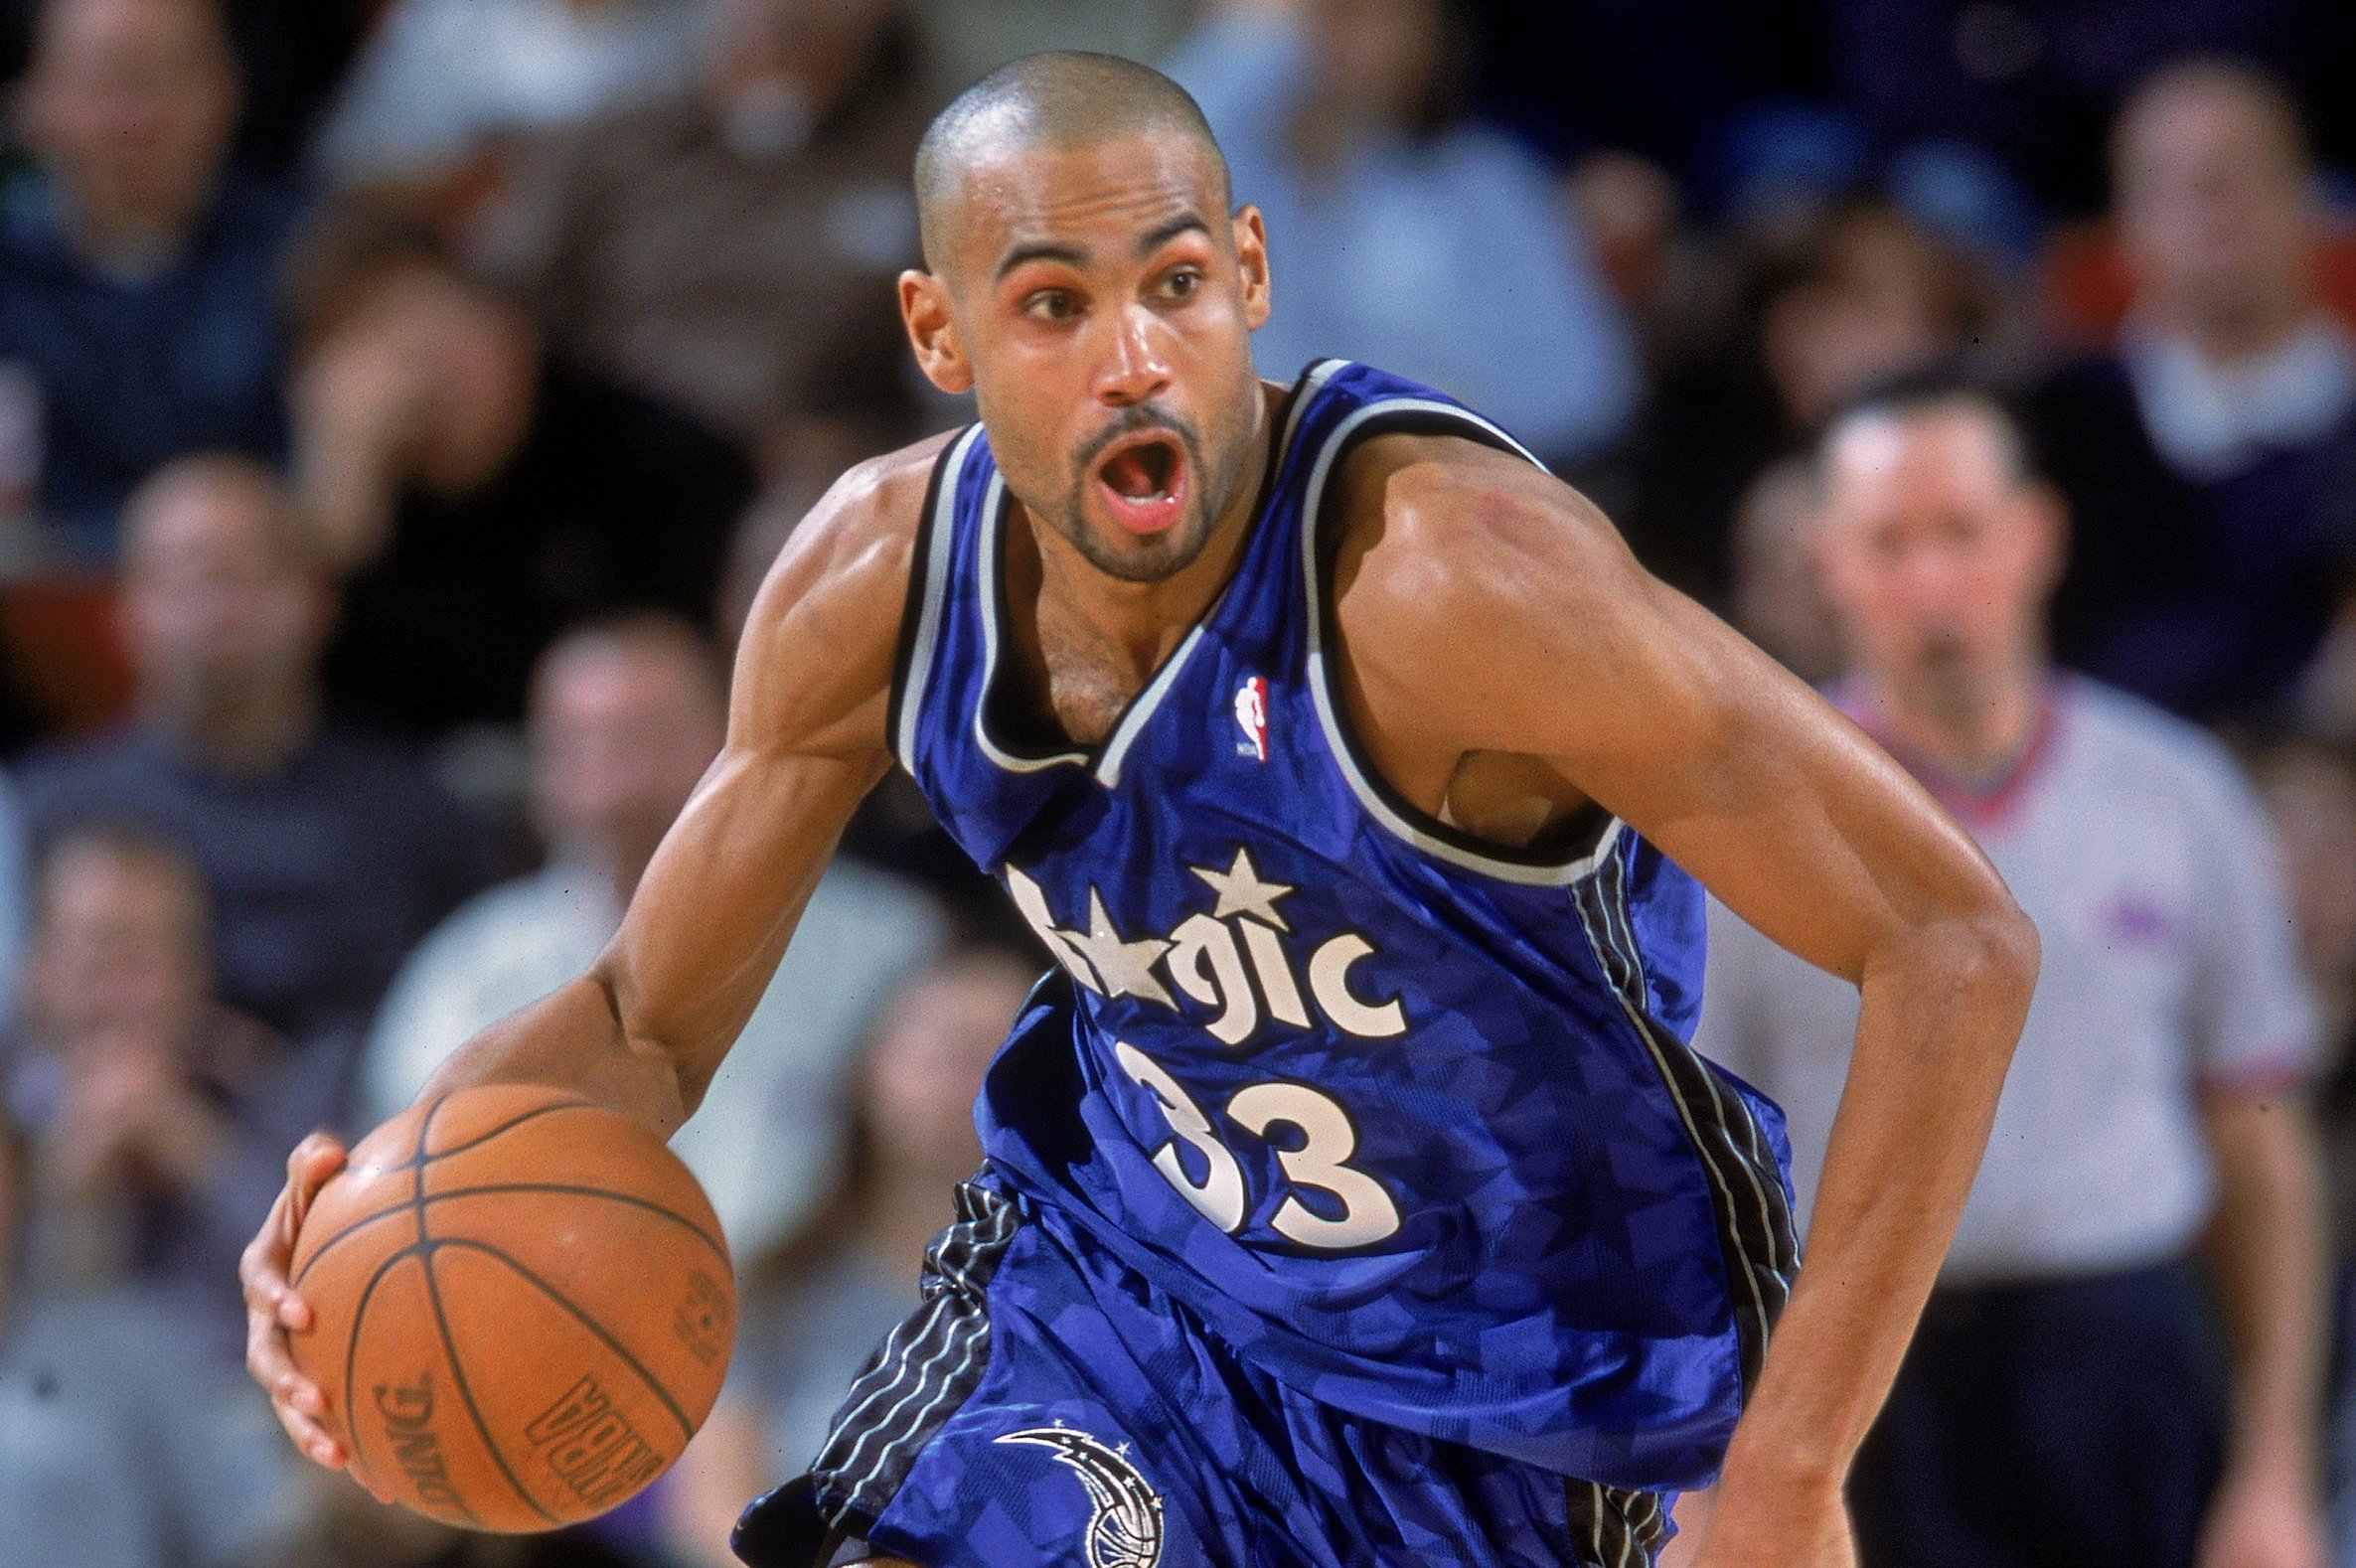 Grant Hill to be inducted into the Basketball Hall of Fame